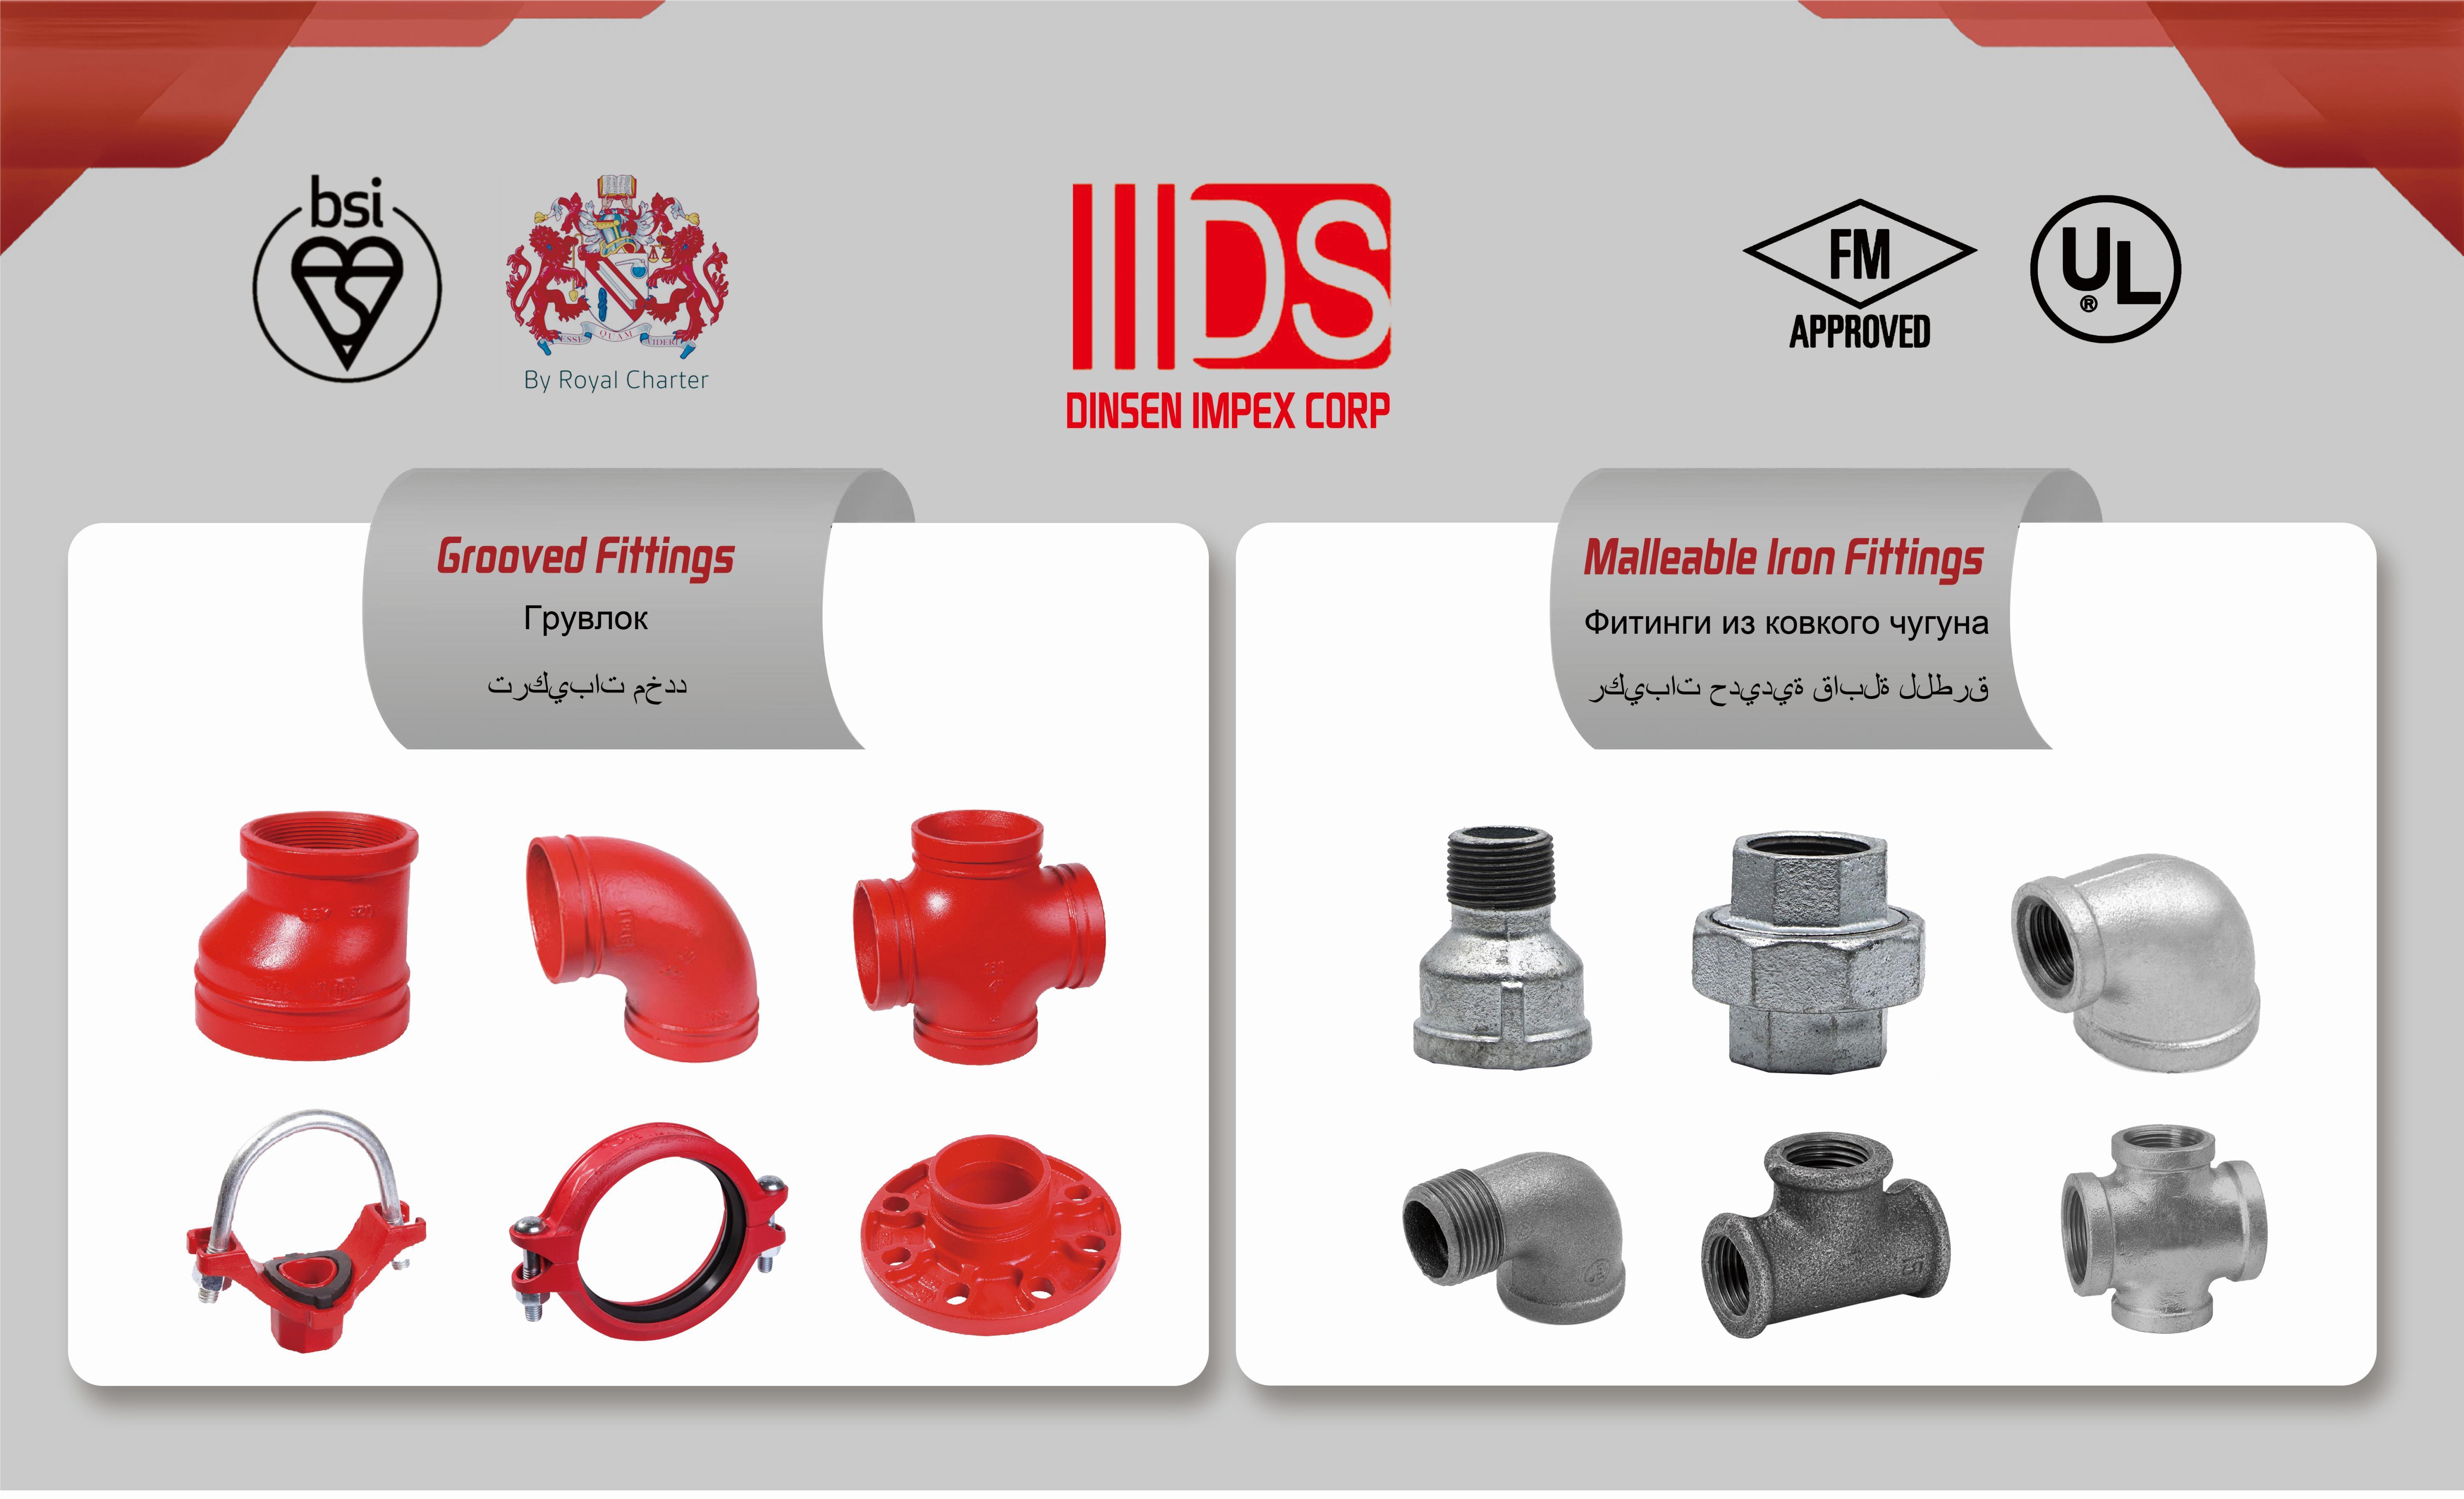 Grooved fittings, malleable iron fittings